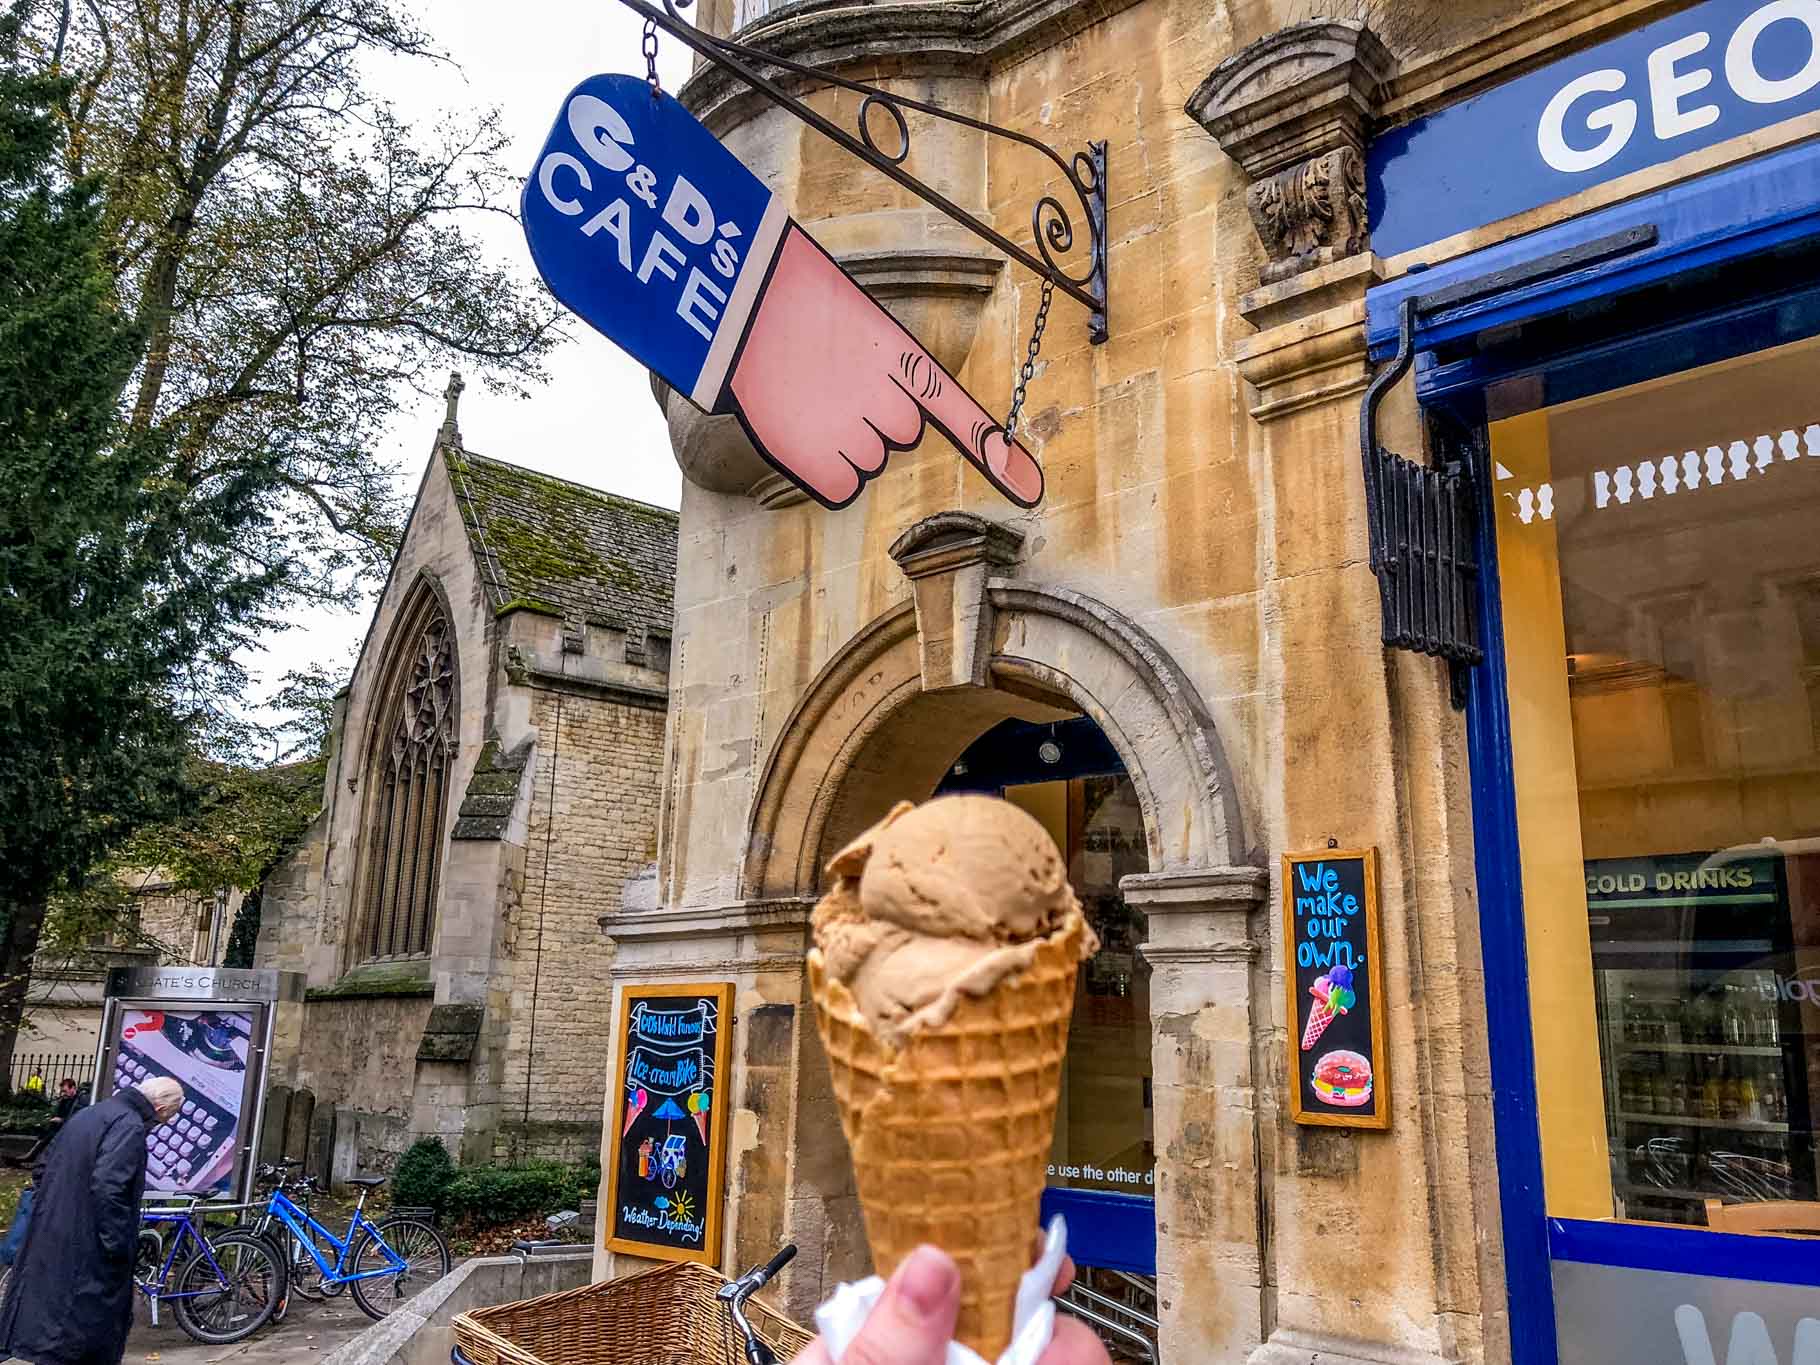 Ice cream cone in front of a hand-shaped sign for G&Ds cafe